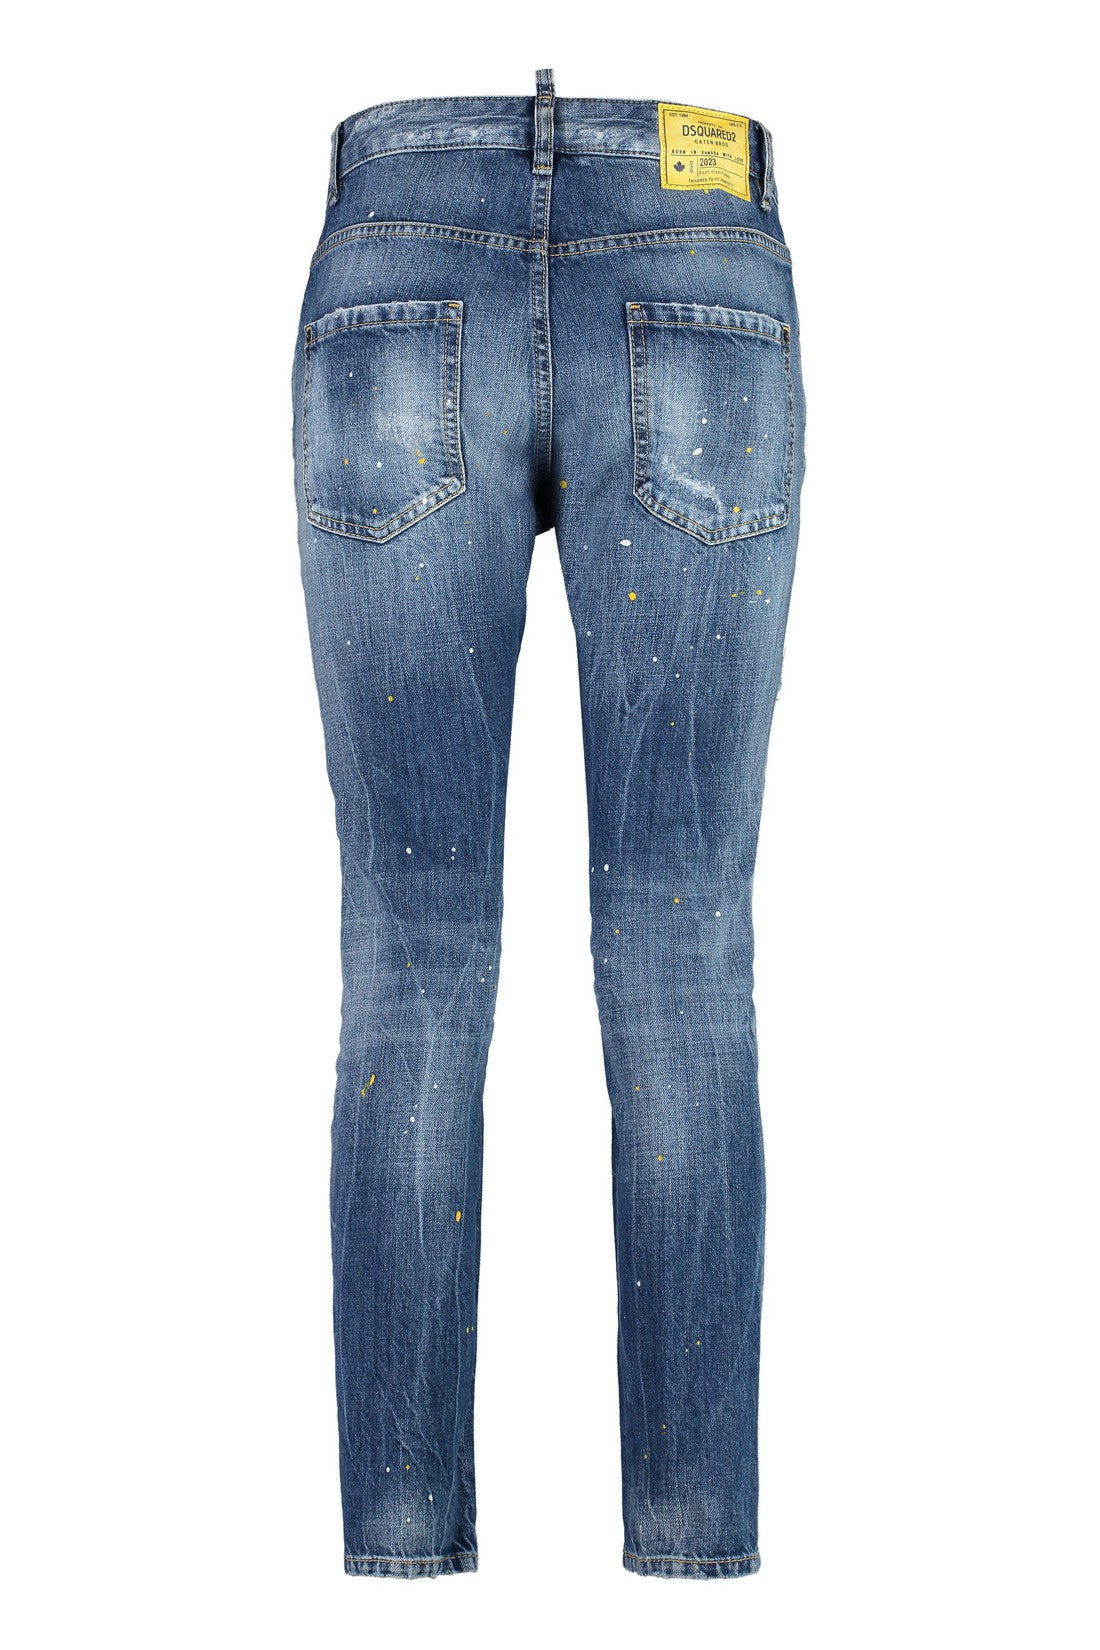 Dsquared2-OUTLET-SALE-Cool Girl cropped jeans-ARCHIVIST